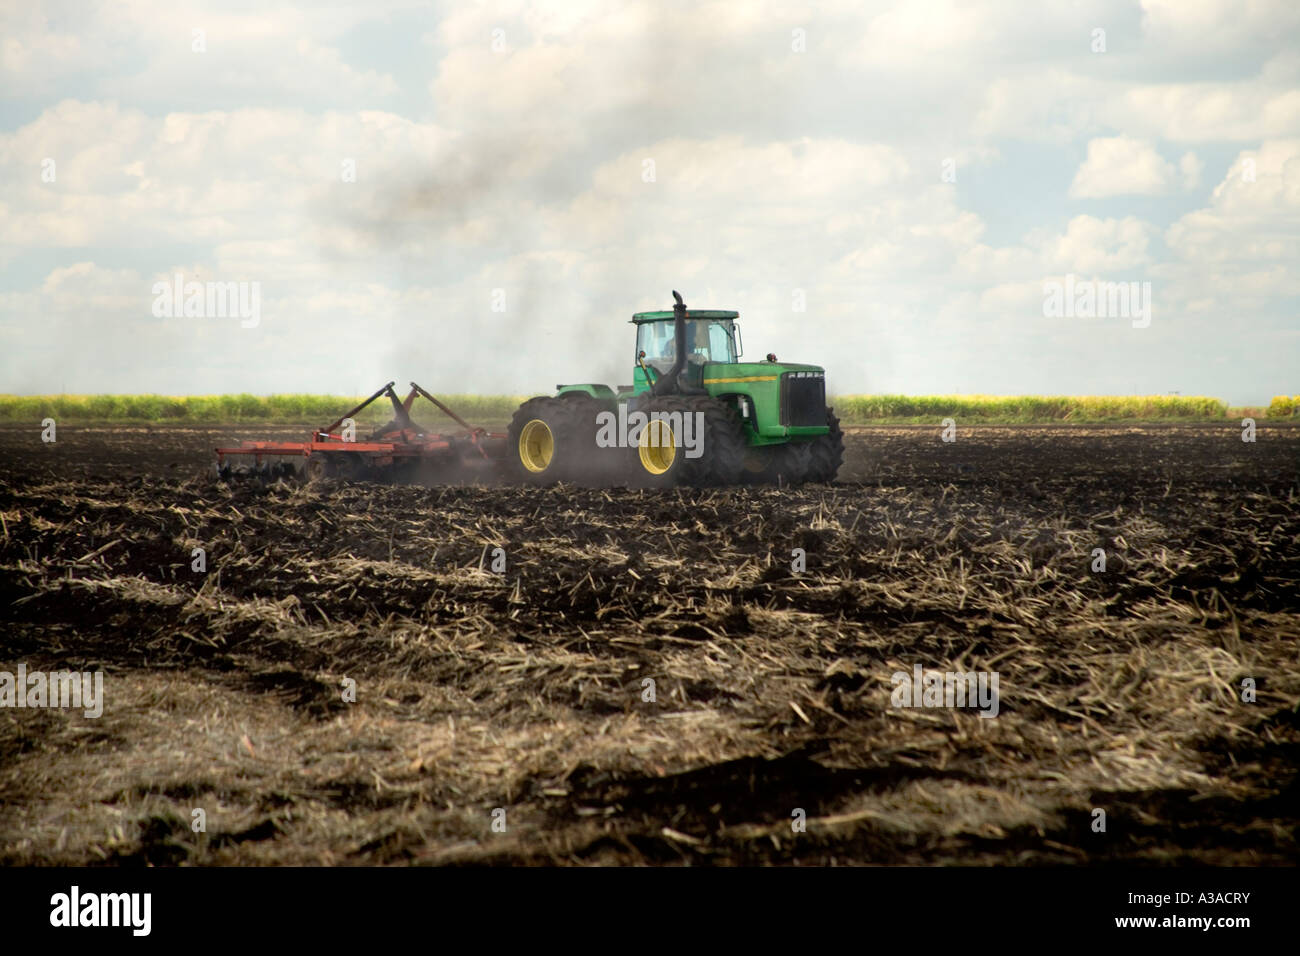 Sugar cane, John Deere tractor cultivating burnt harvested sugar cane field, Stock Photo